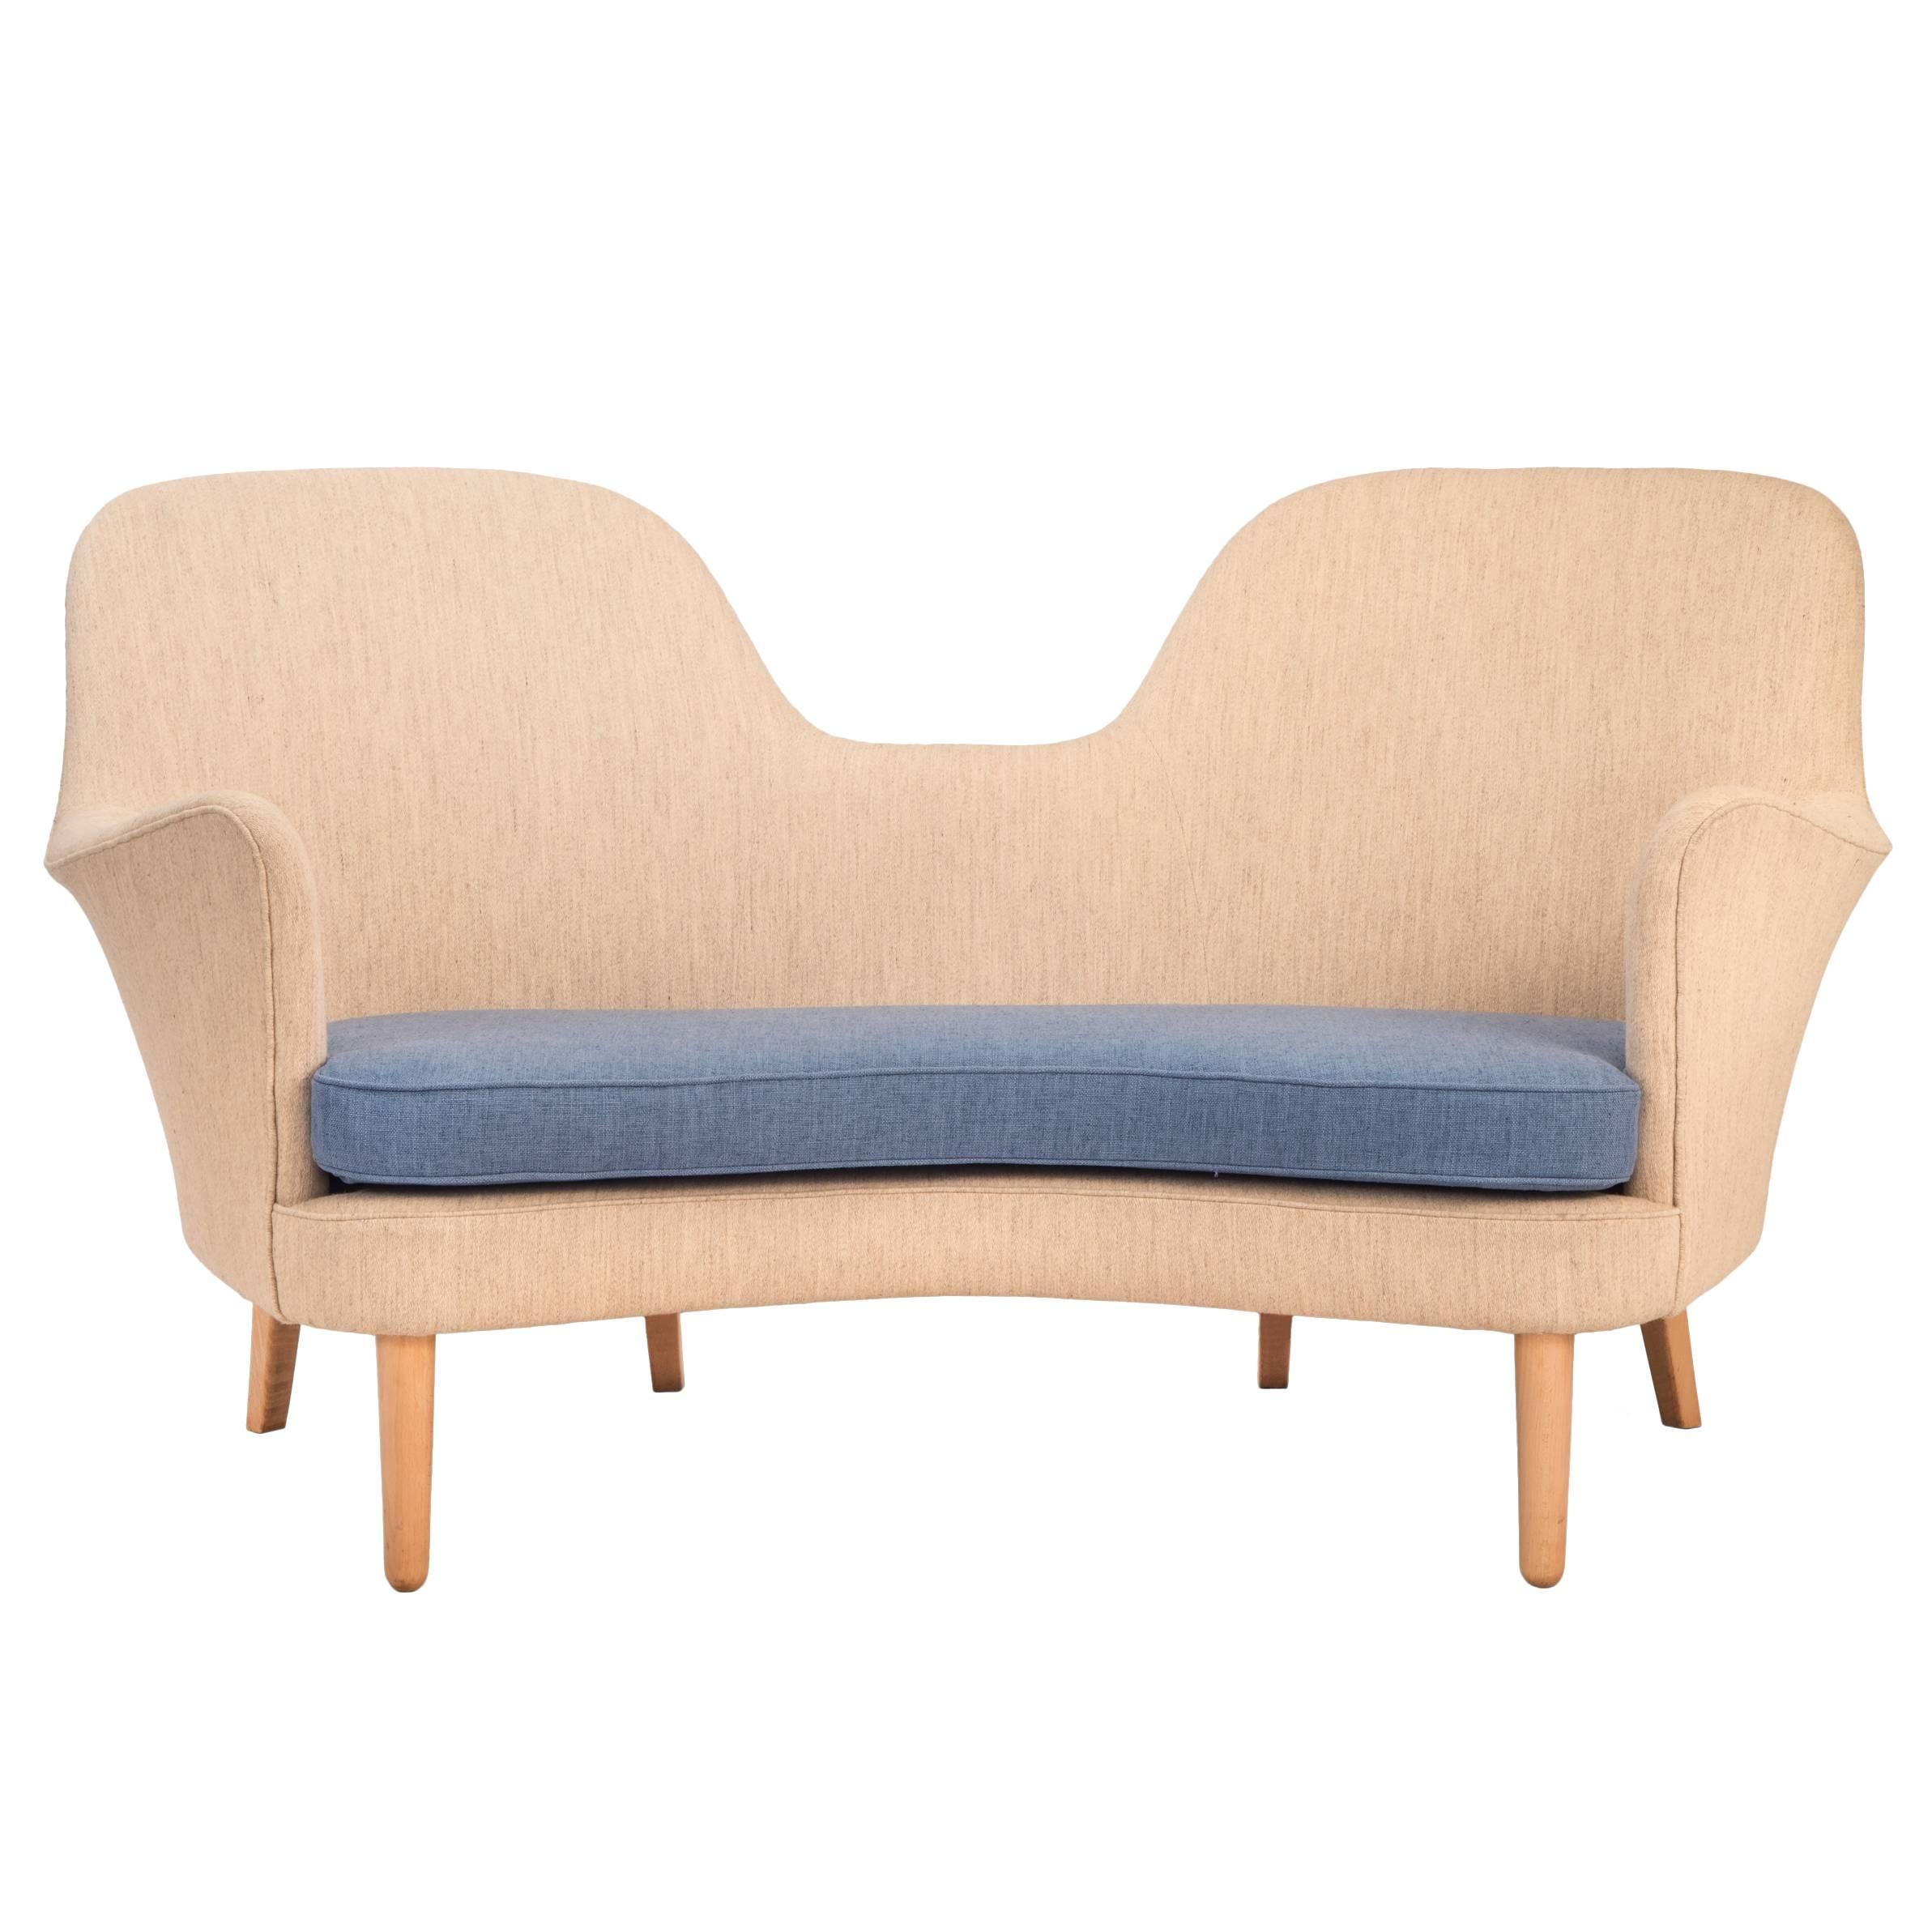 Curvaceous and Comfortable Danish Modern Two Person Sofa